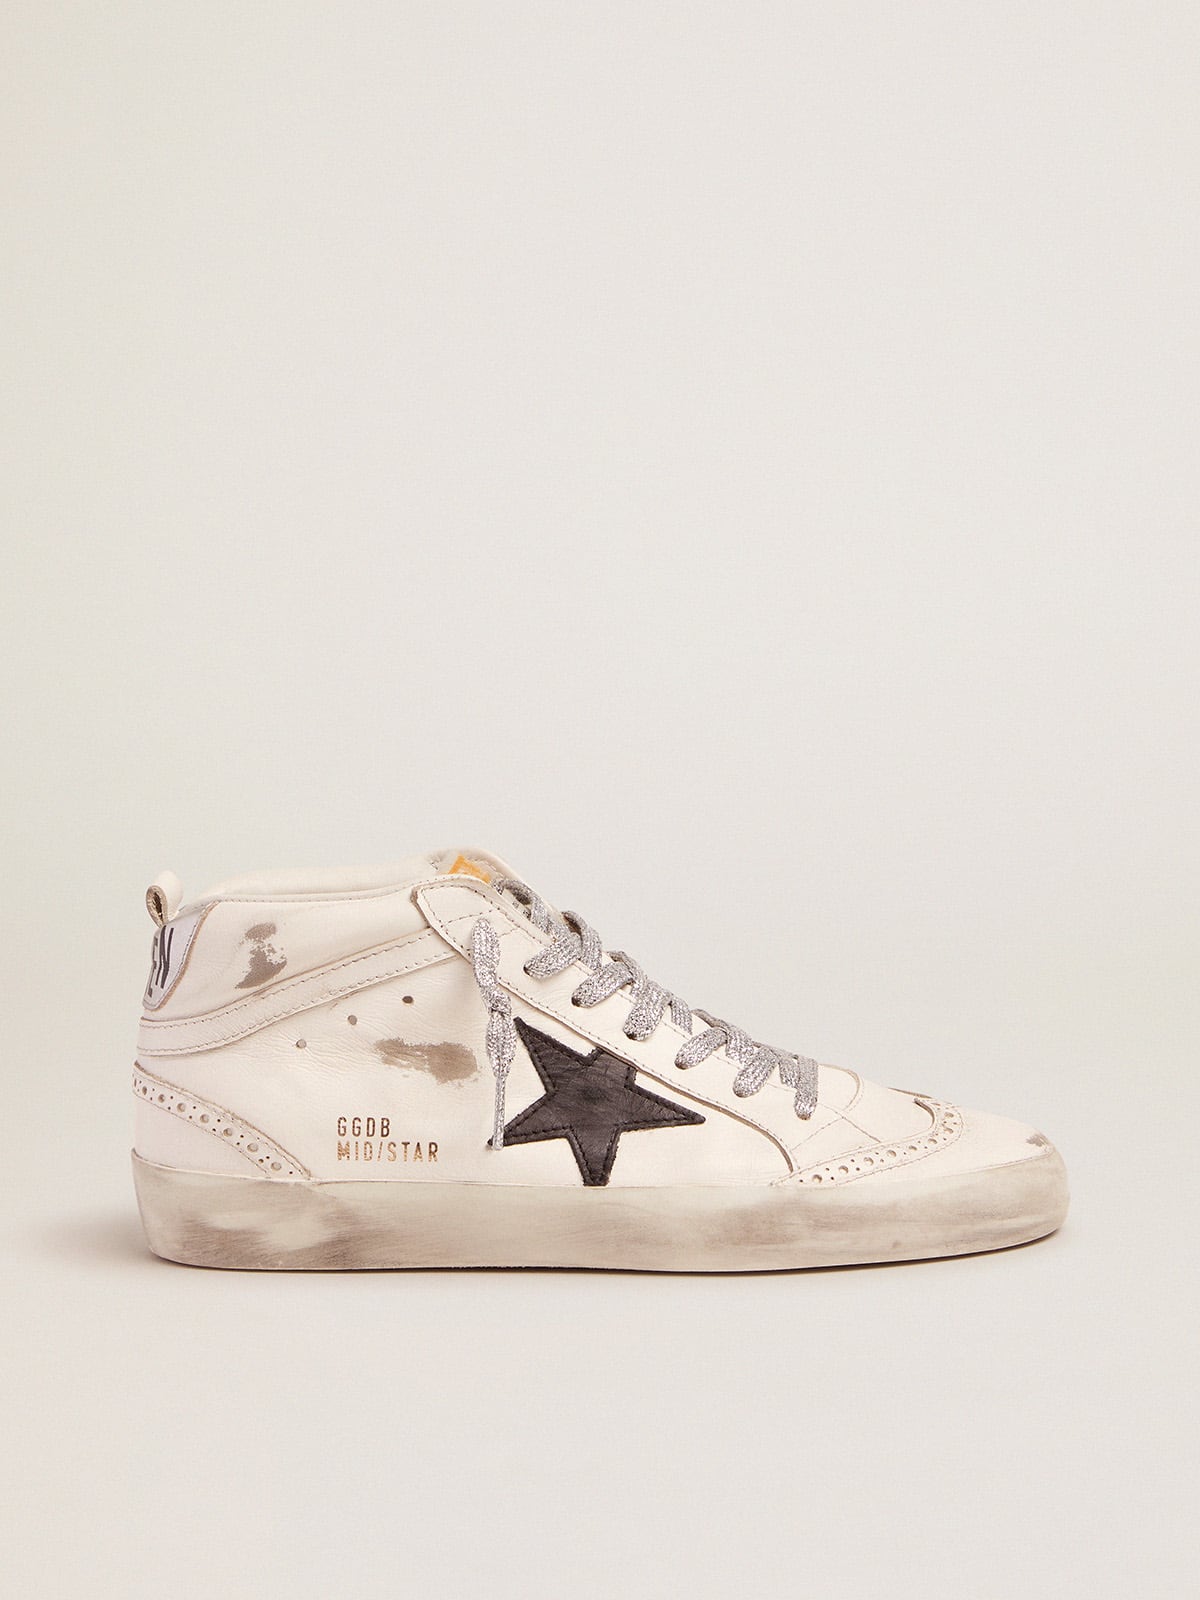 Women's Mid Star with laminated heel tab and glitter laces